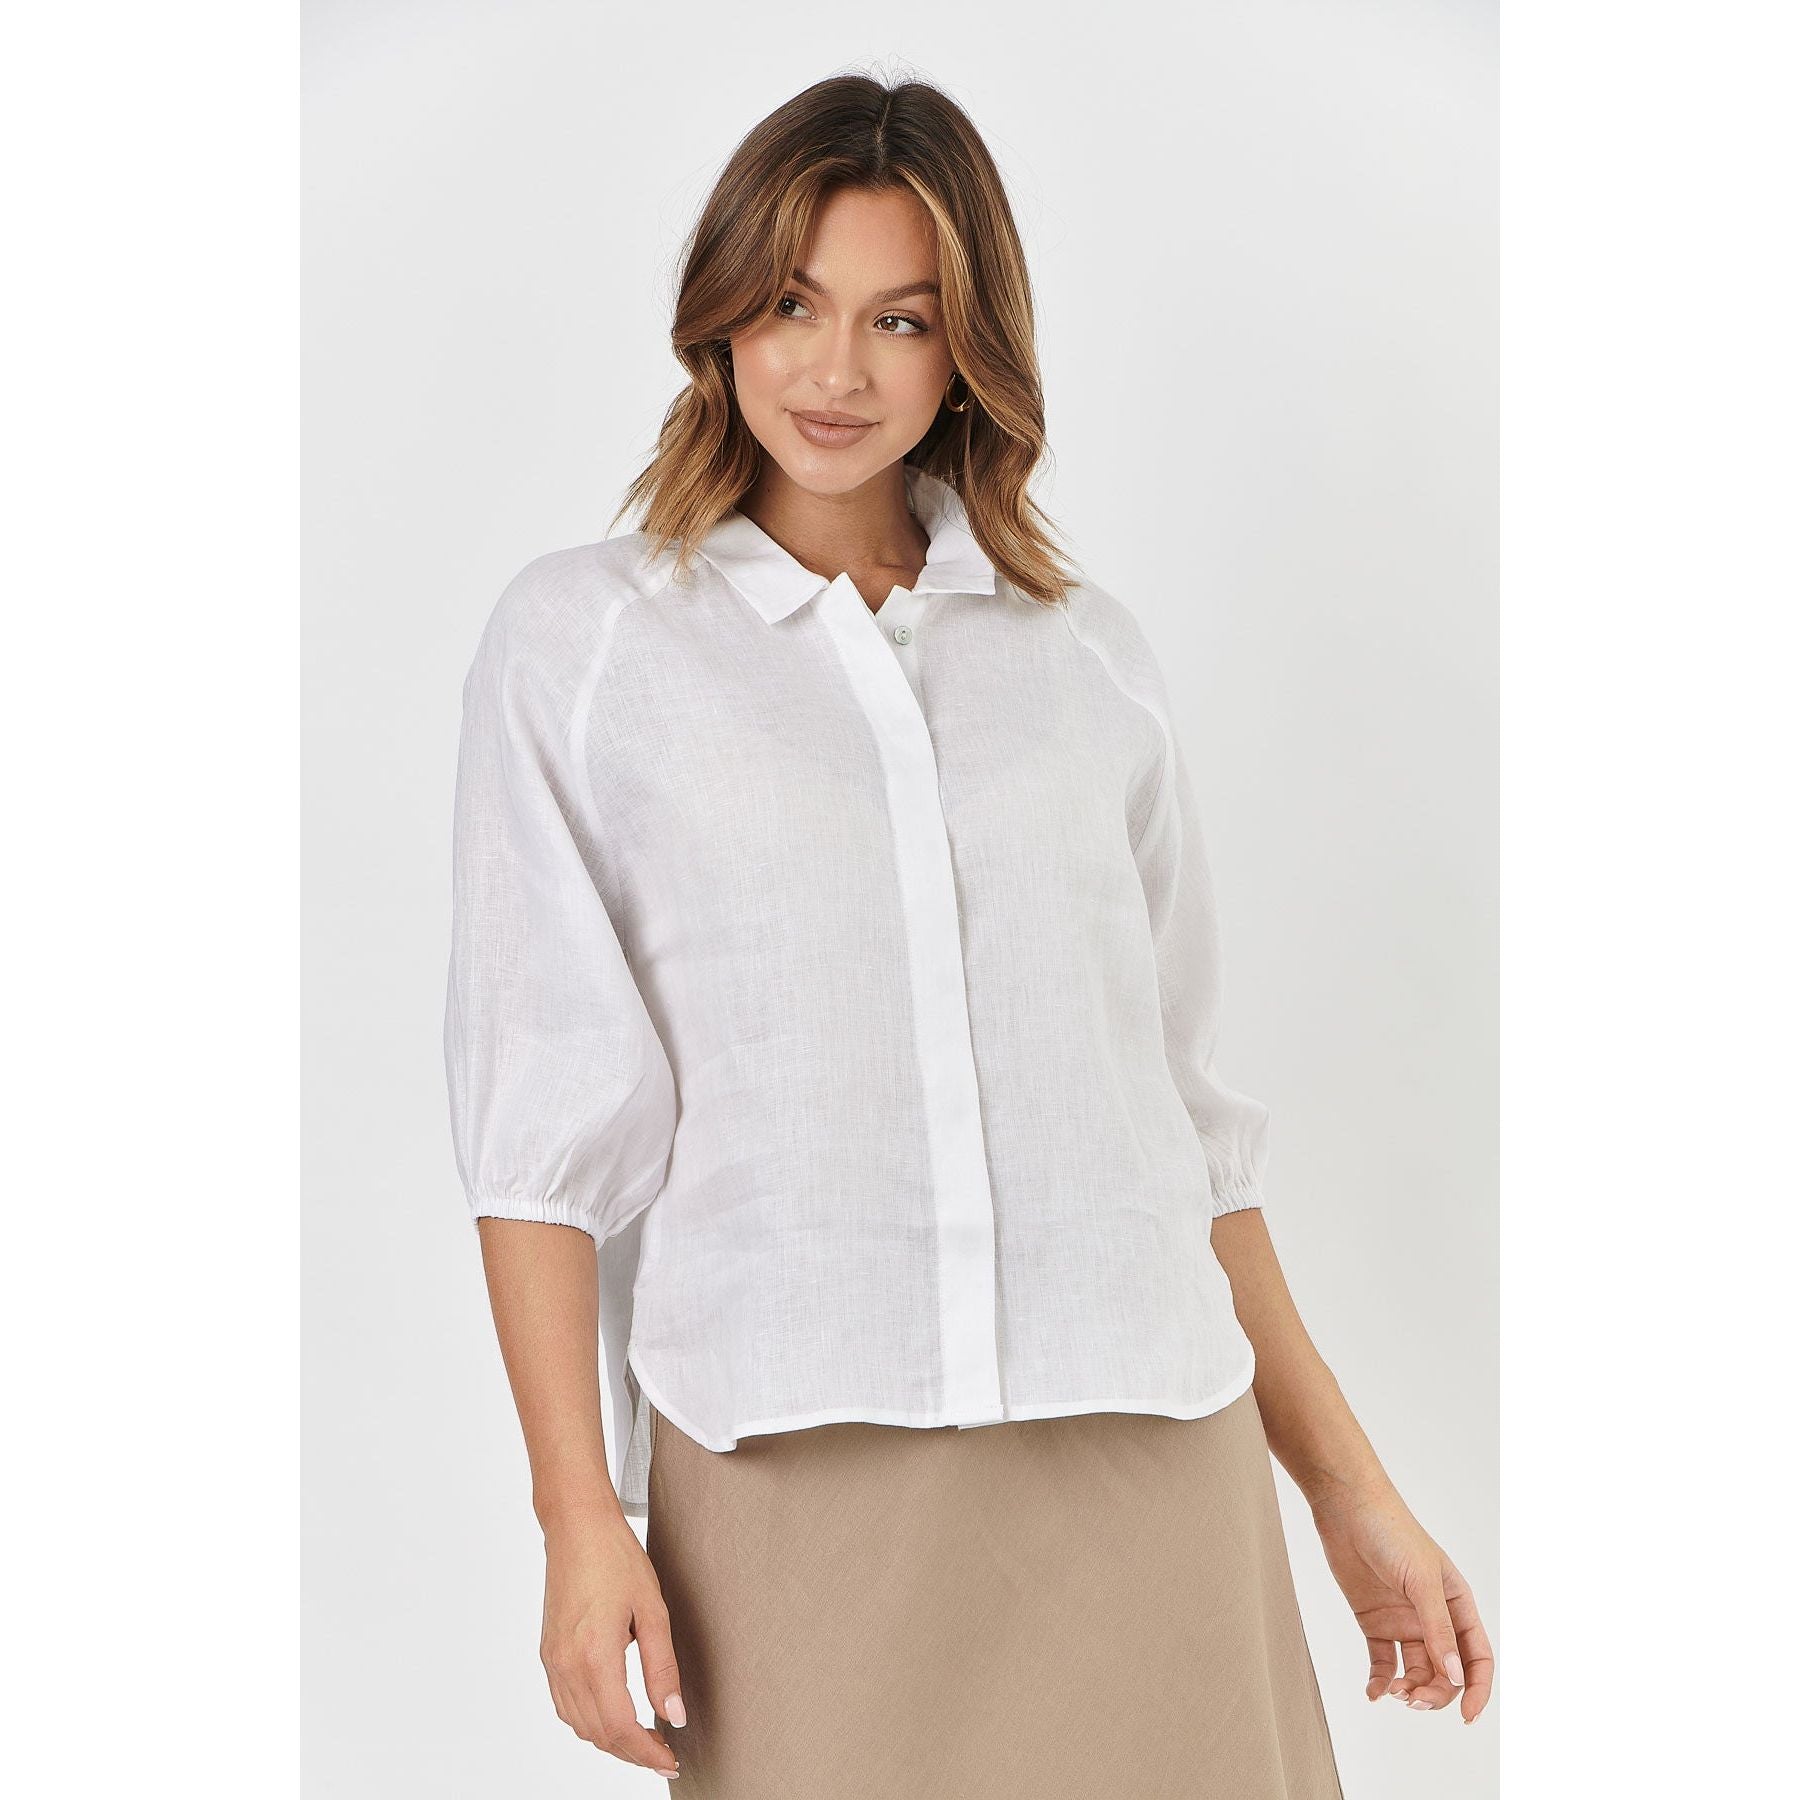 Naturals by O&J - Linen Top White